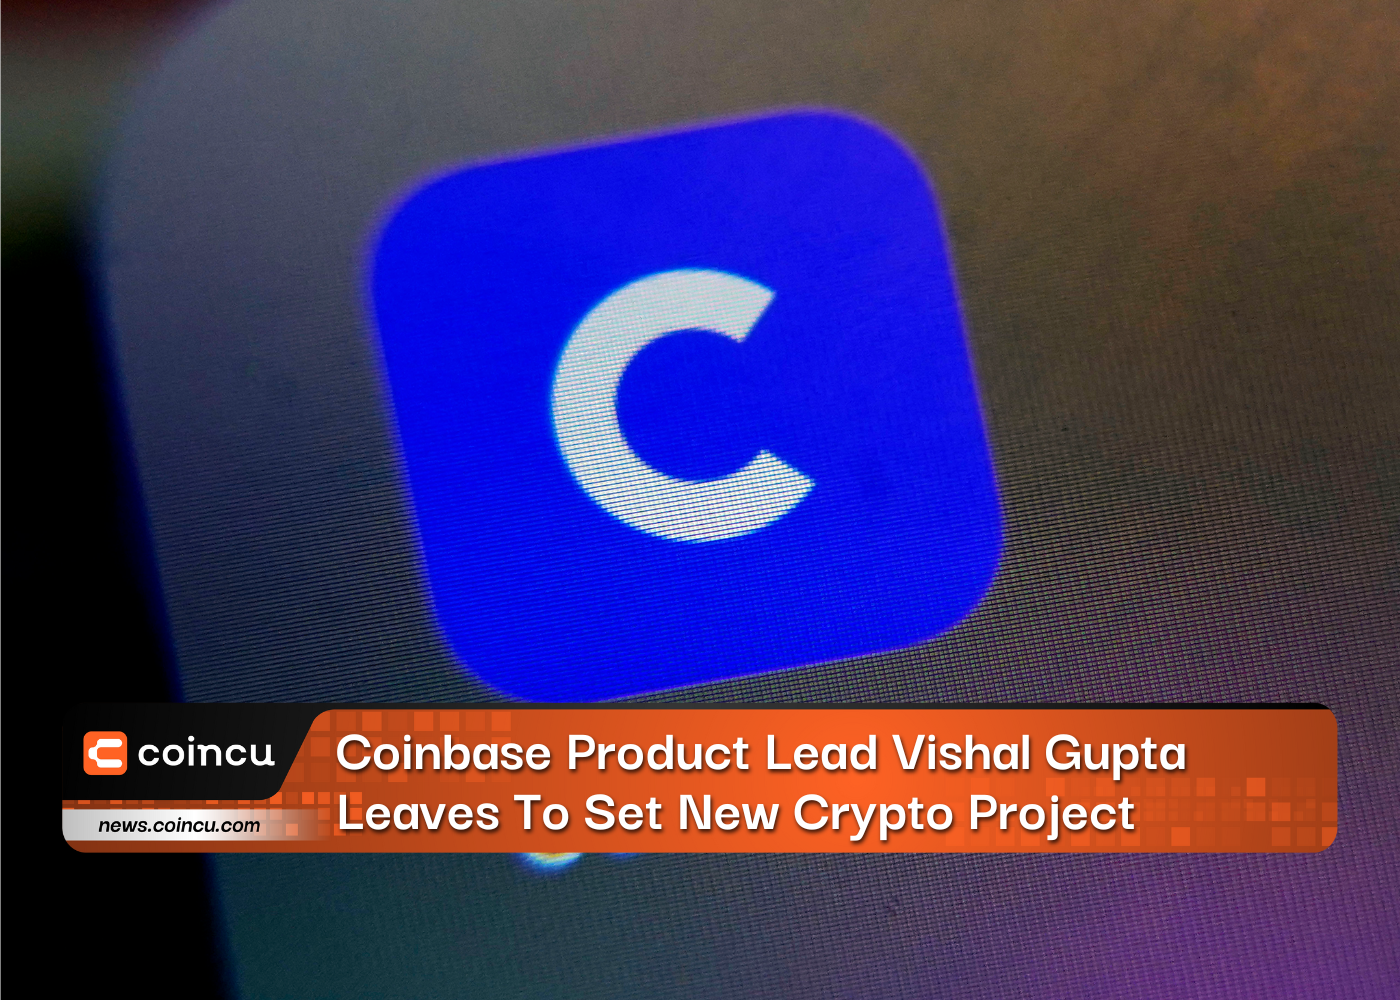 Coinbase Product Lead Vishal Gupta Leaves To Set New Crypto Project